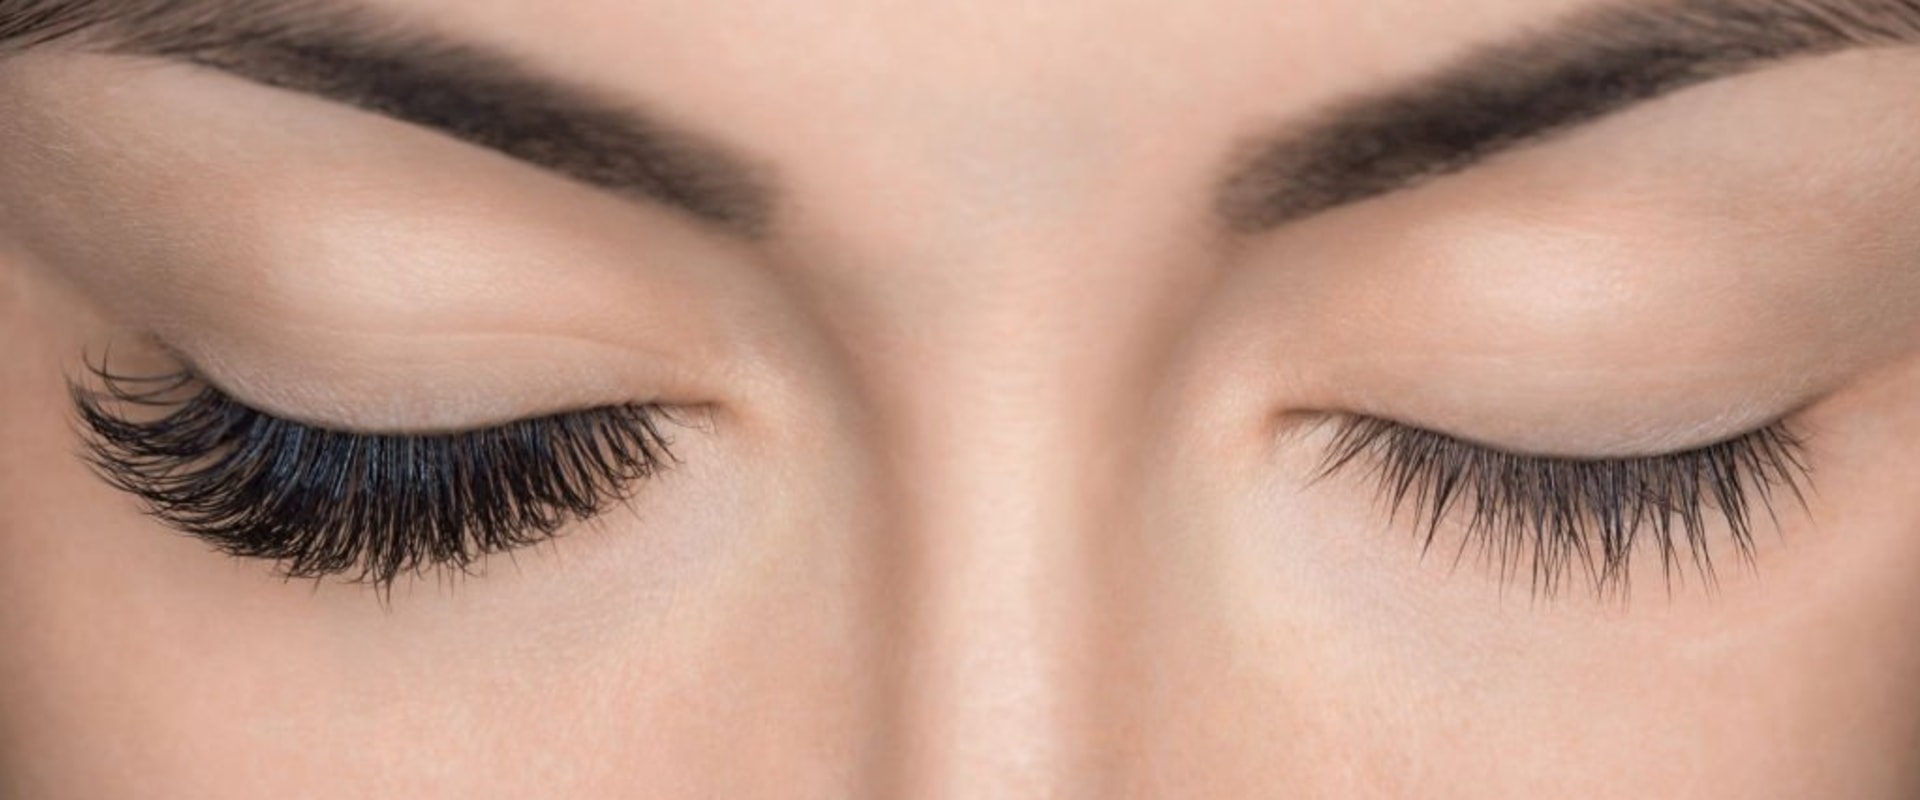 Can Eyelash Perming Damage Your Eyes? A Comprehensive Guide